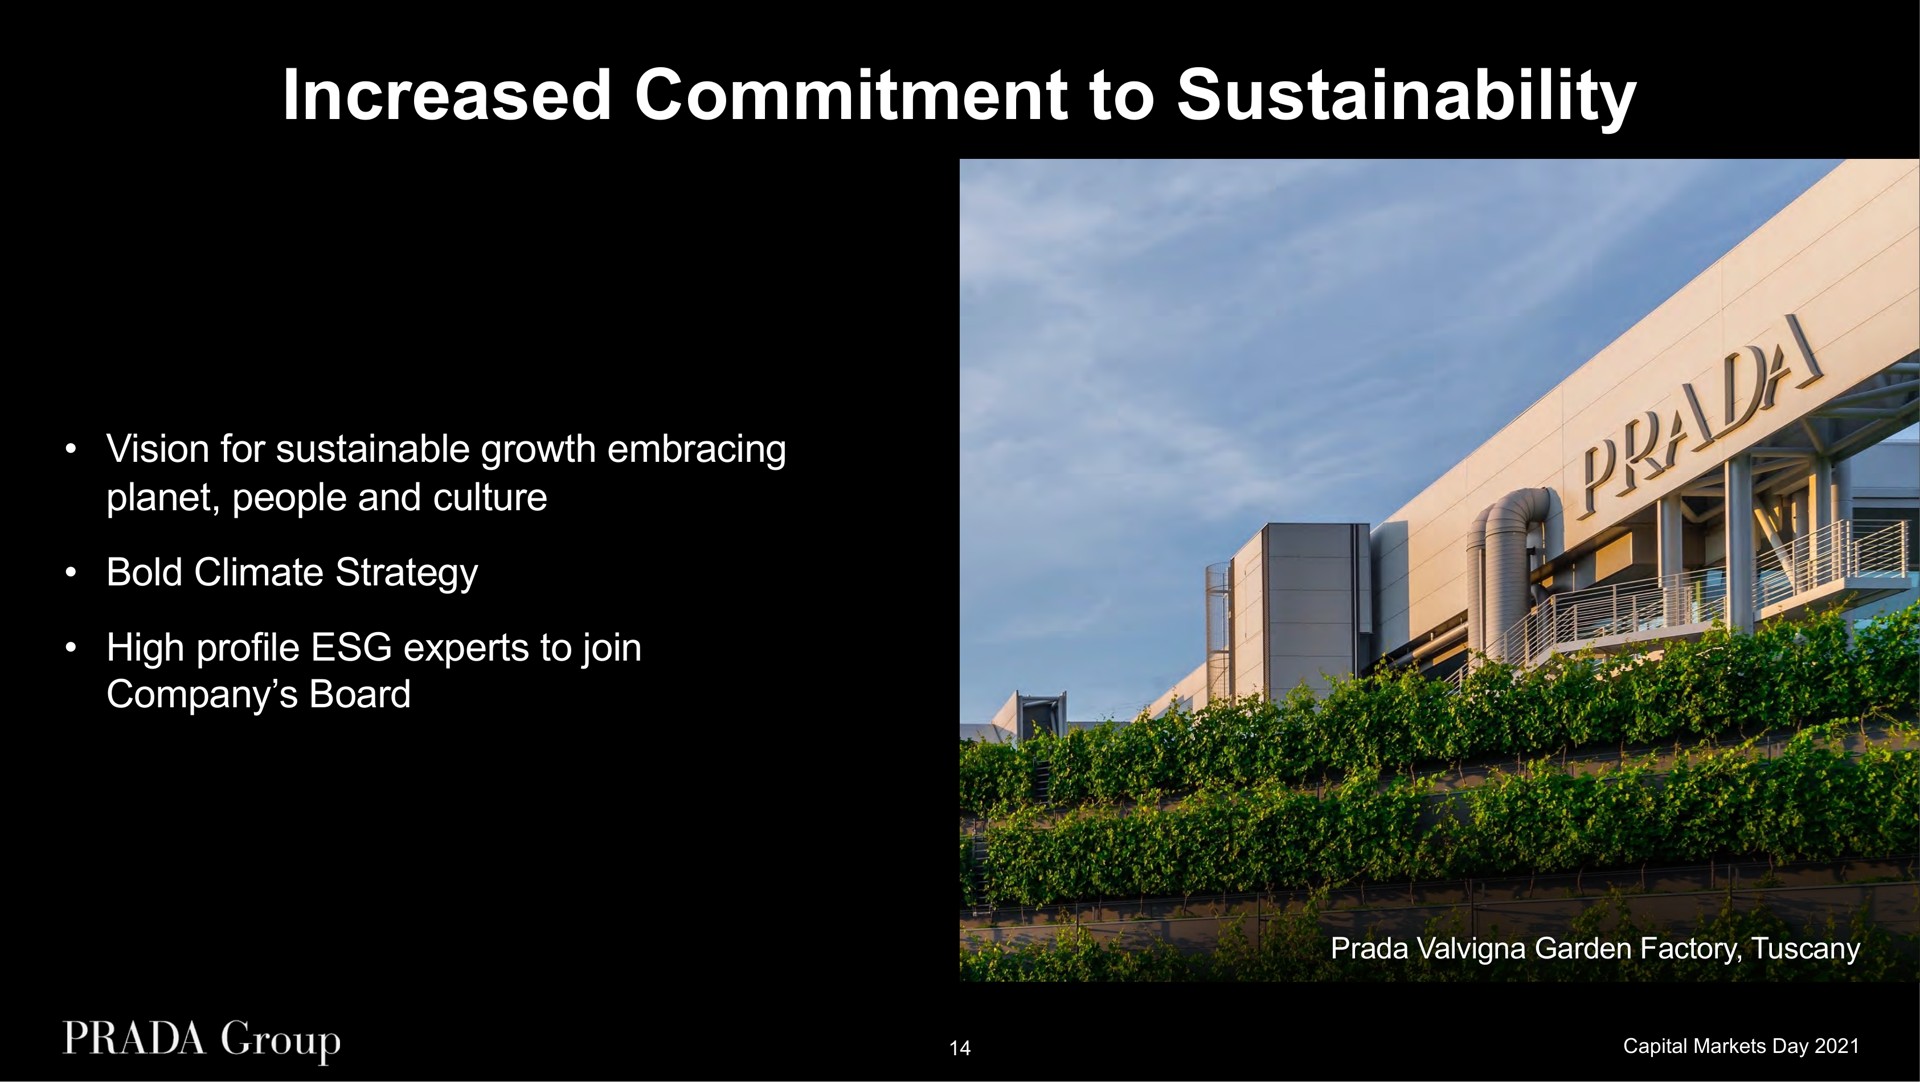 increased commitment to vision for sustainable growth embracing planet people and culture bold climate strategy high profile experts to join company board garden factory | Prada